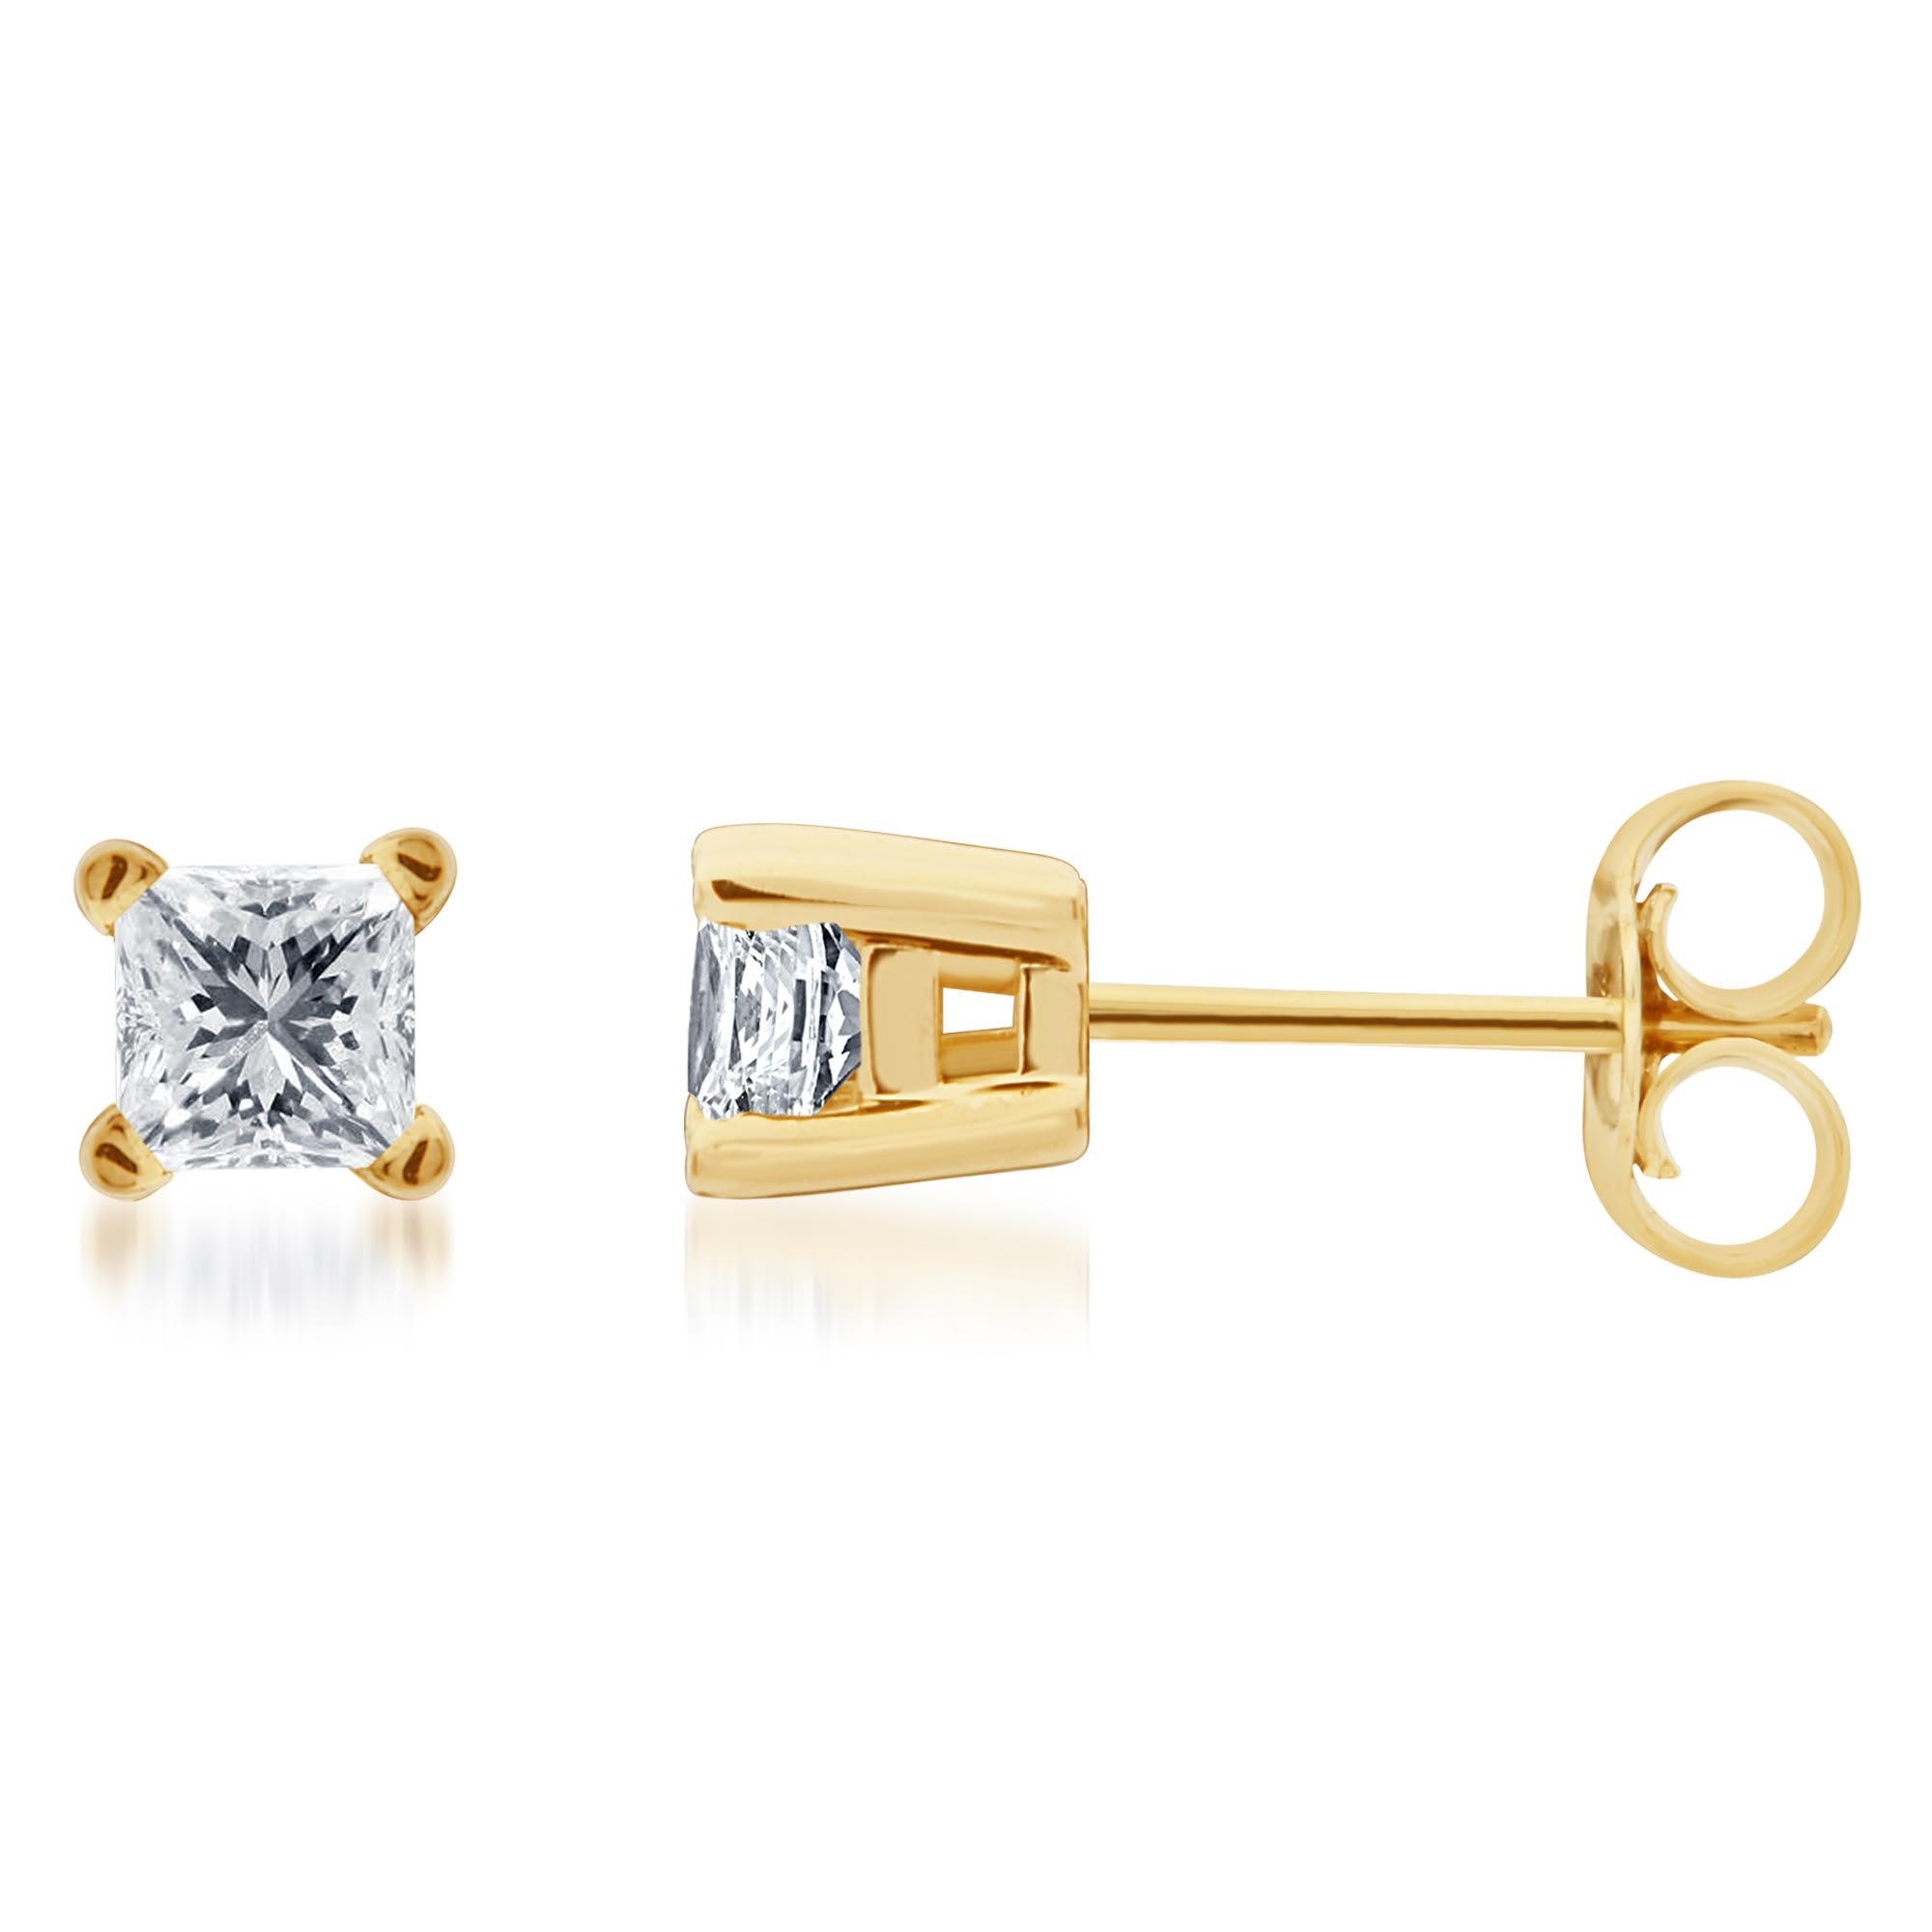 Solid 14k Yellow Gold Princess Cut Diamond Solitaire Studs Earrings 1ct ...